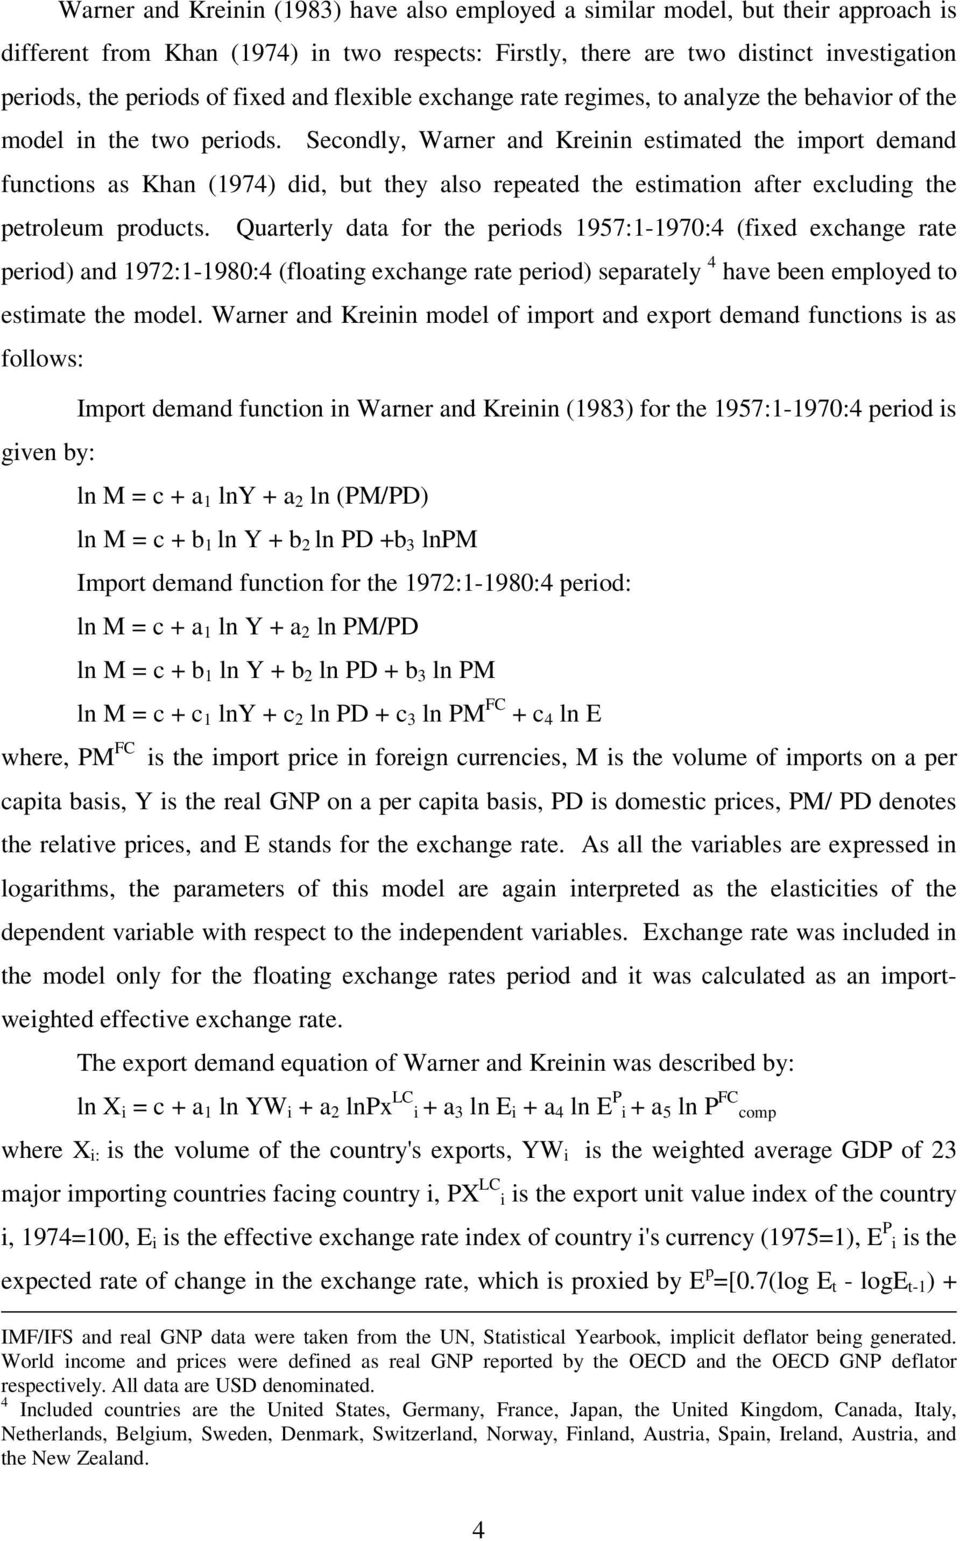 Secondly, Warner and Kreinin estimated the import demand functions as Khan (1974) did, but they also repeated the estimation after excluding the petroleum products.